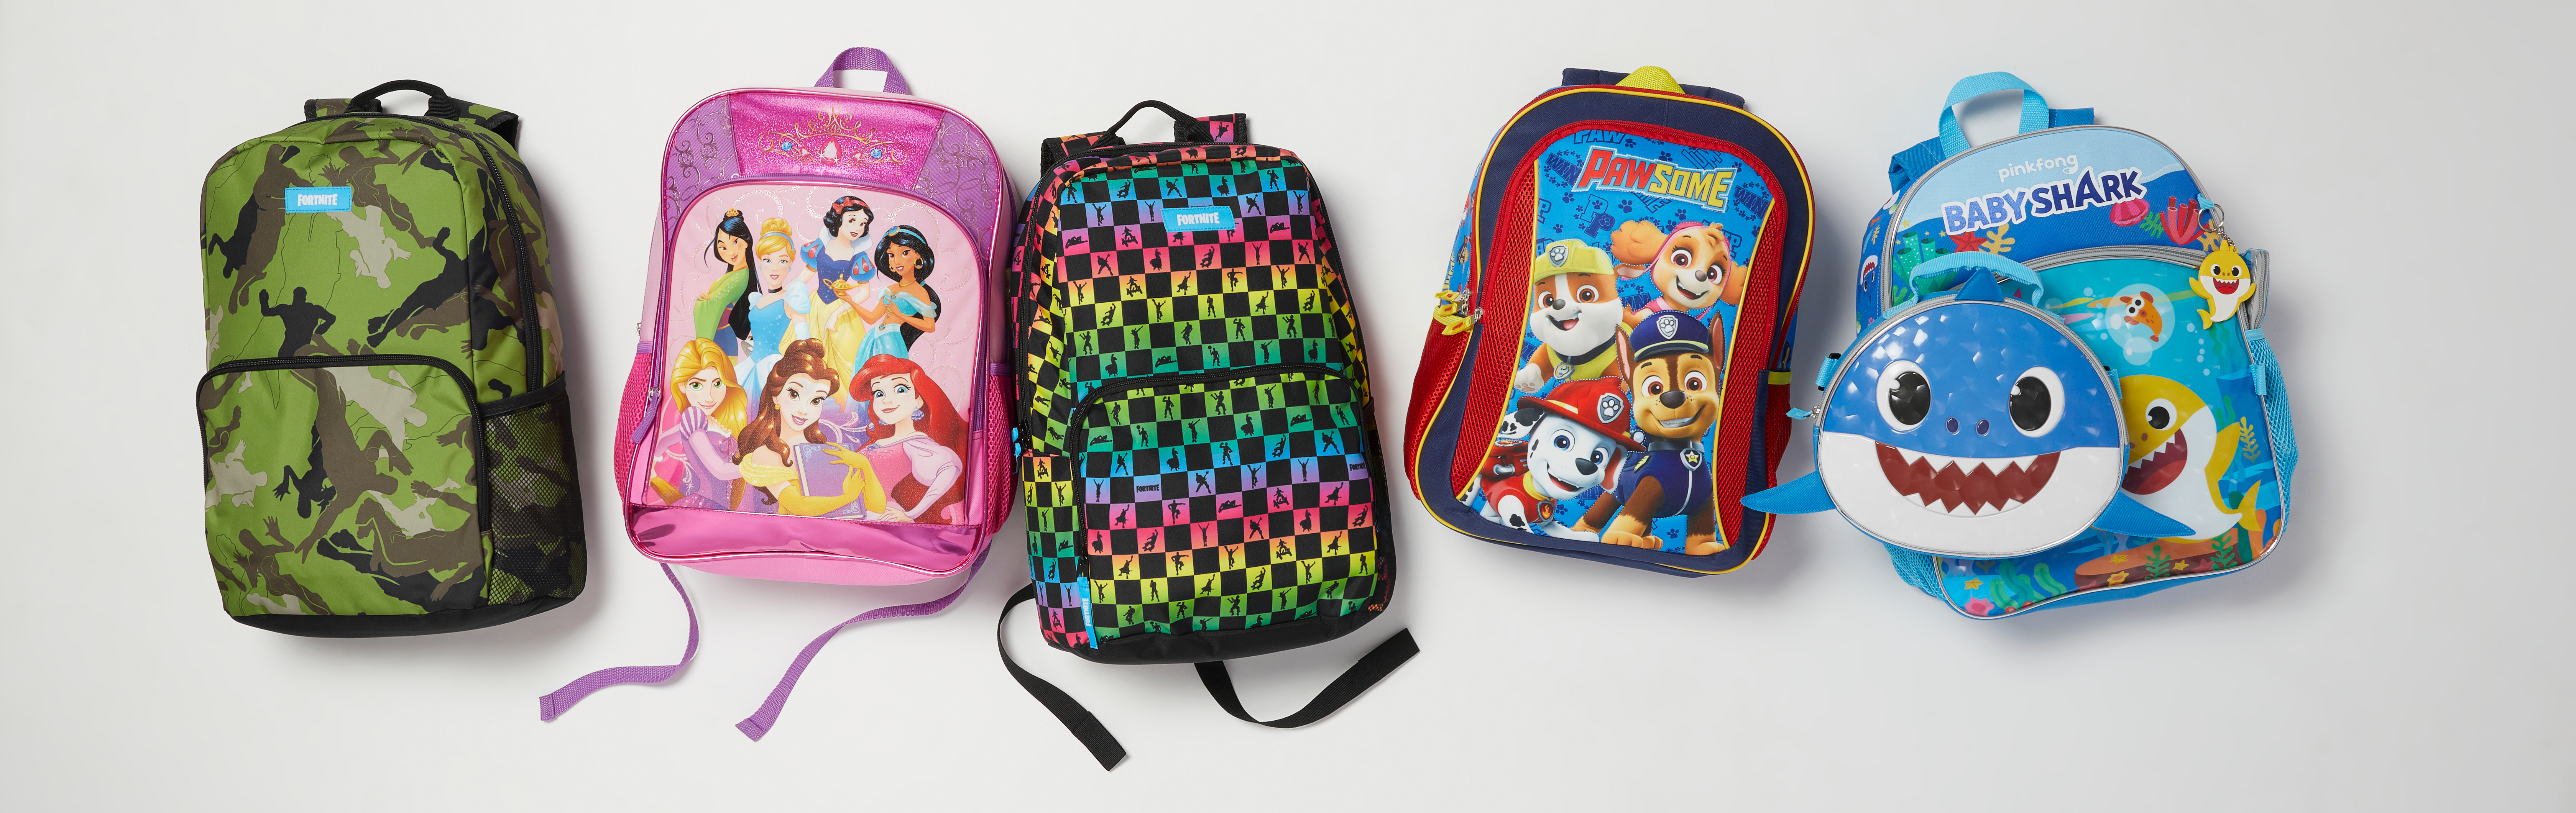 Paw Patrol Pawsome Backpack - image 6 of 6